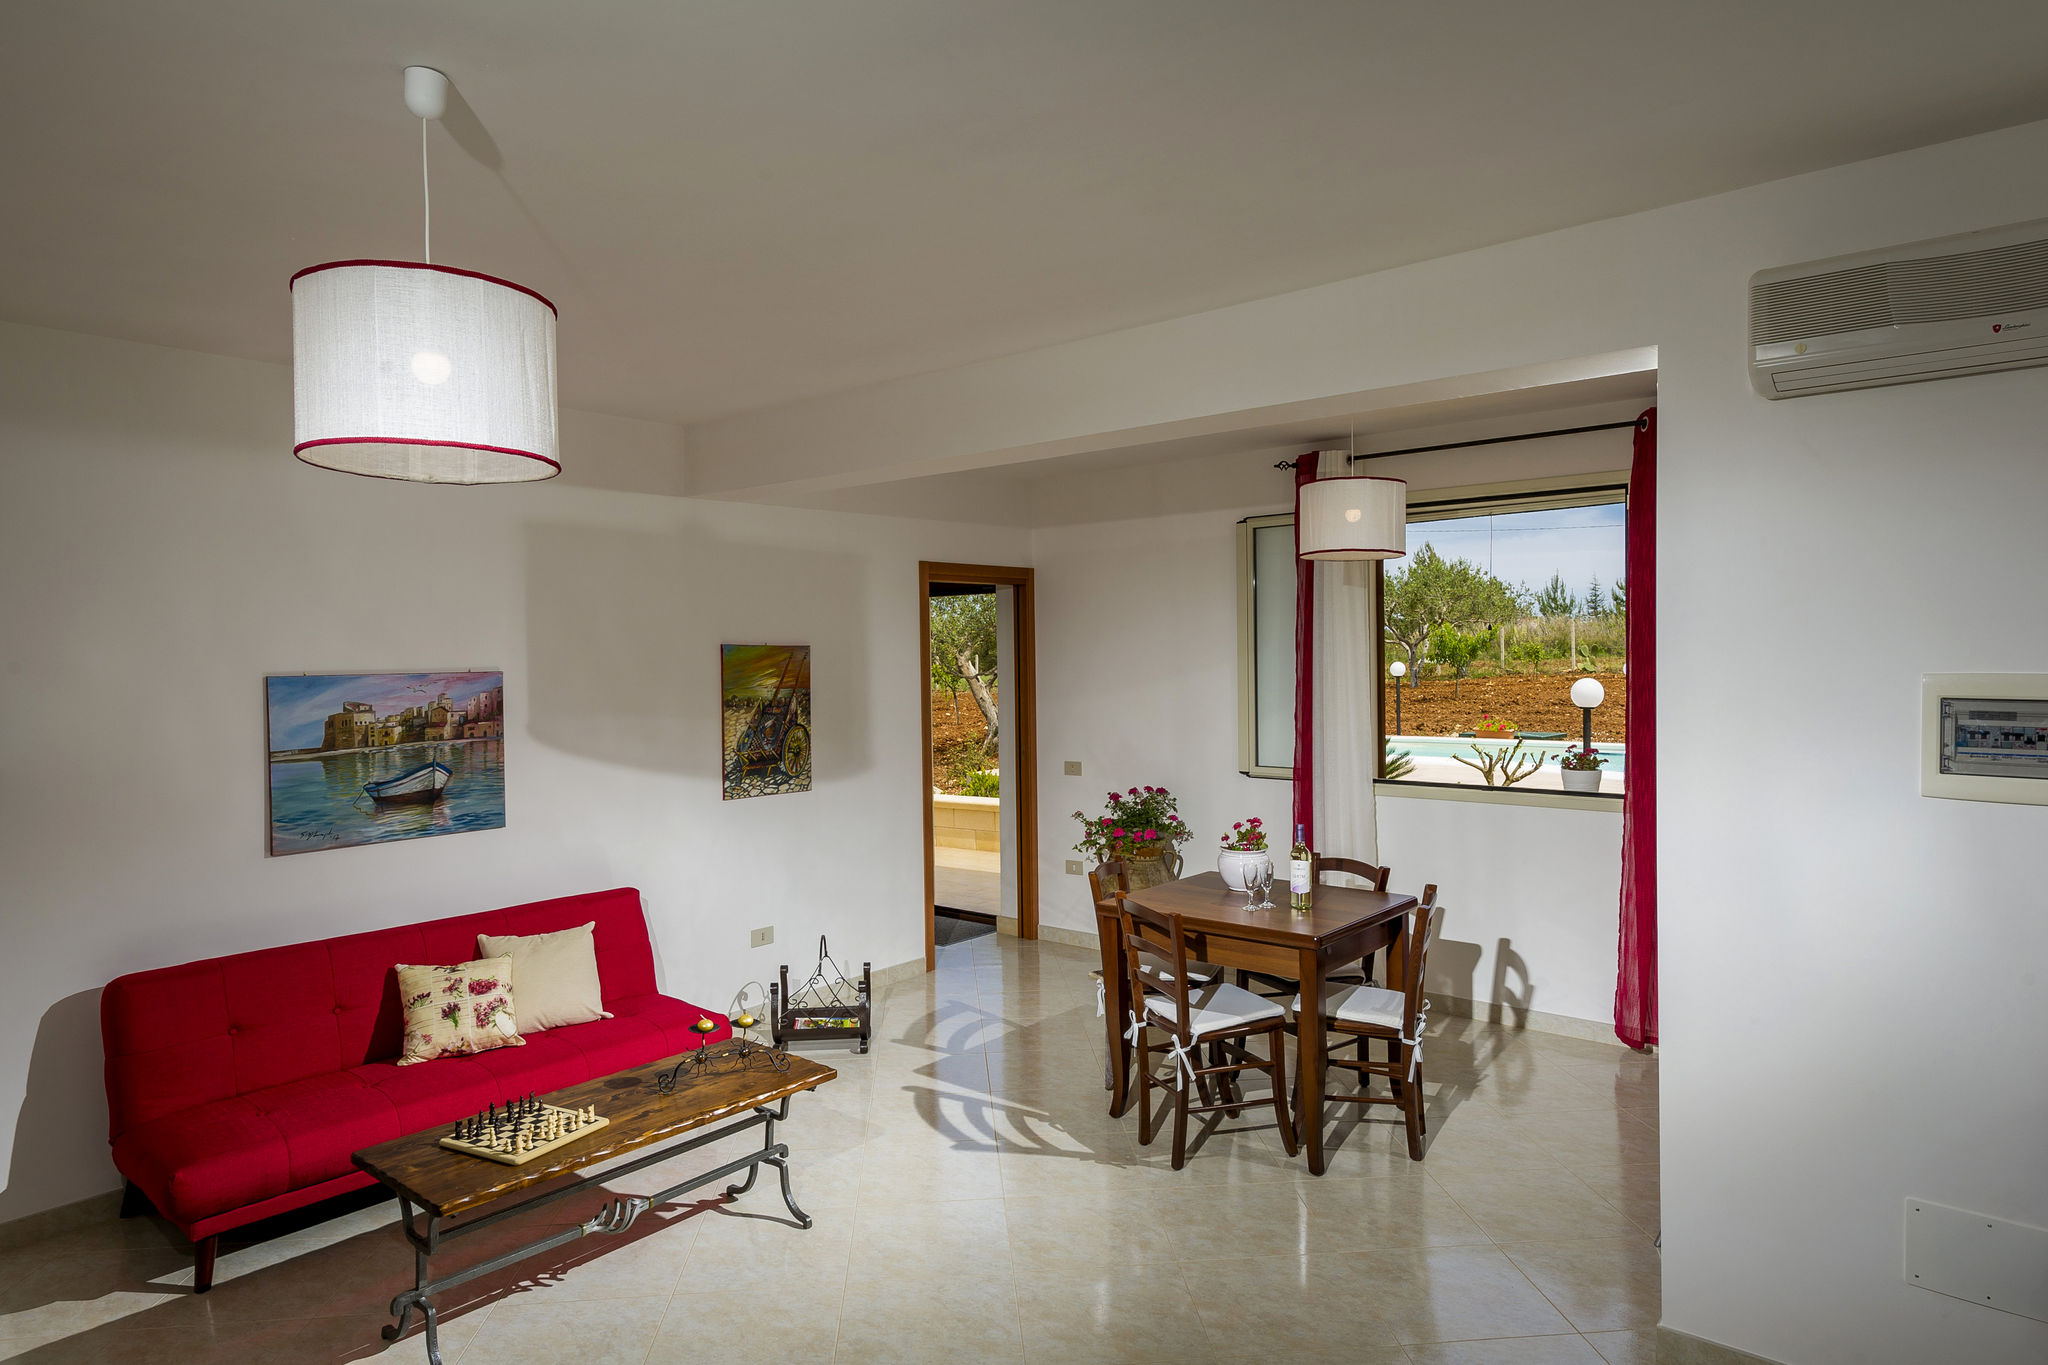 Beautiful detached villa with private pool surrounded by hills and nature.